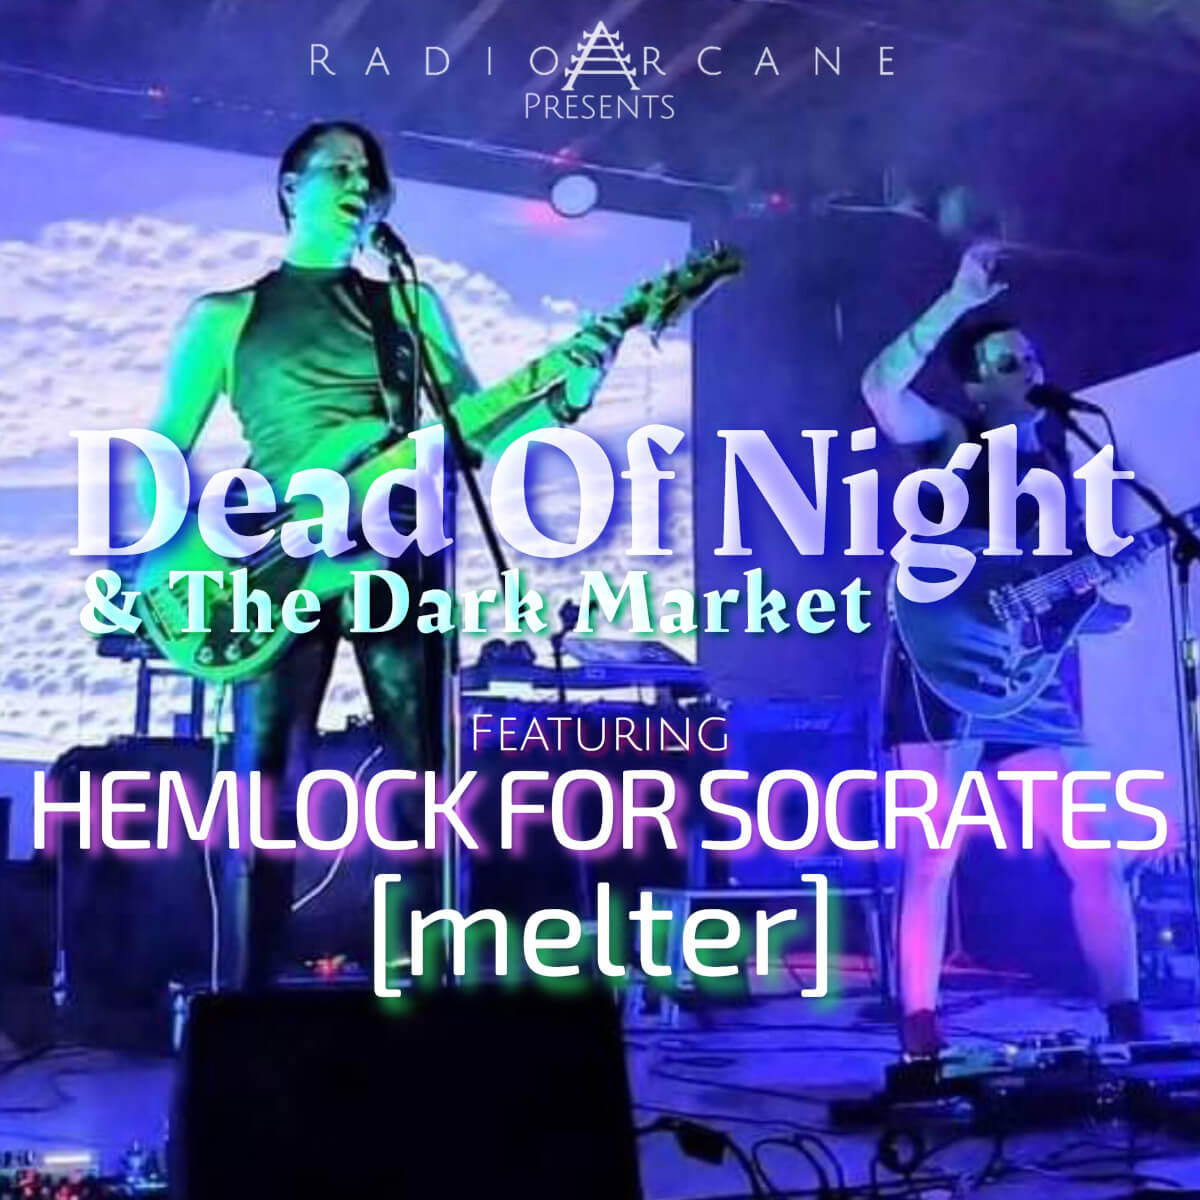 Dead Of Night & The Dark Market feat. Hemlock For Socrates / [melter] / Dead Souls Gothic Lounge